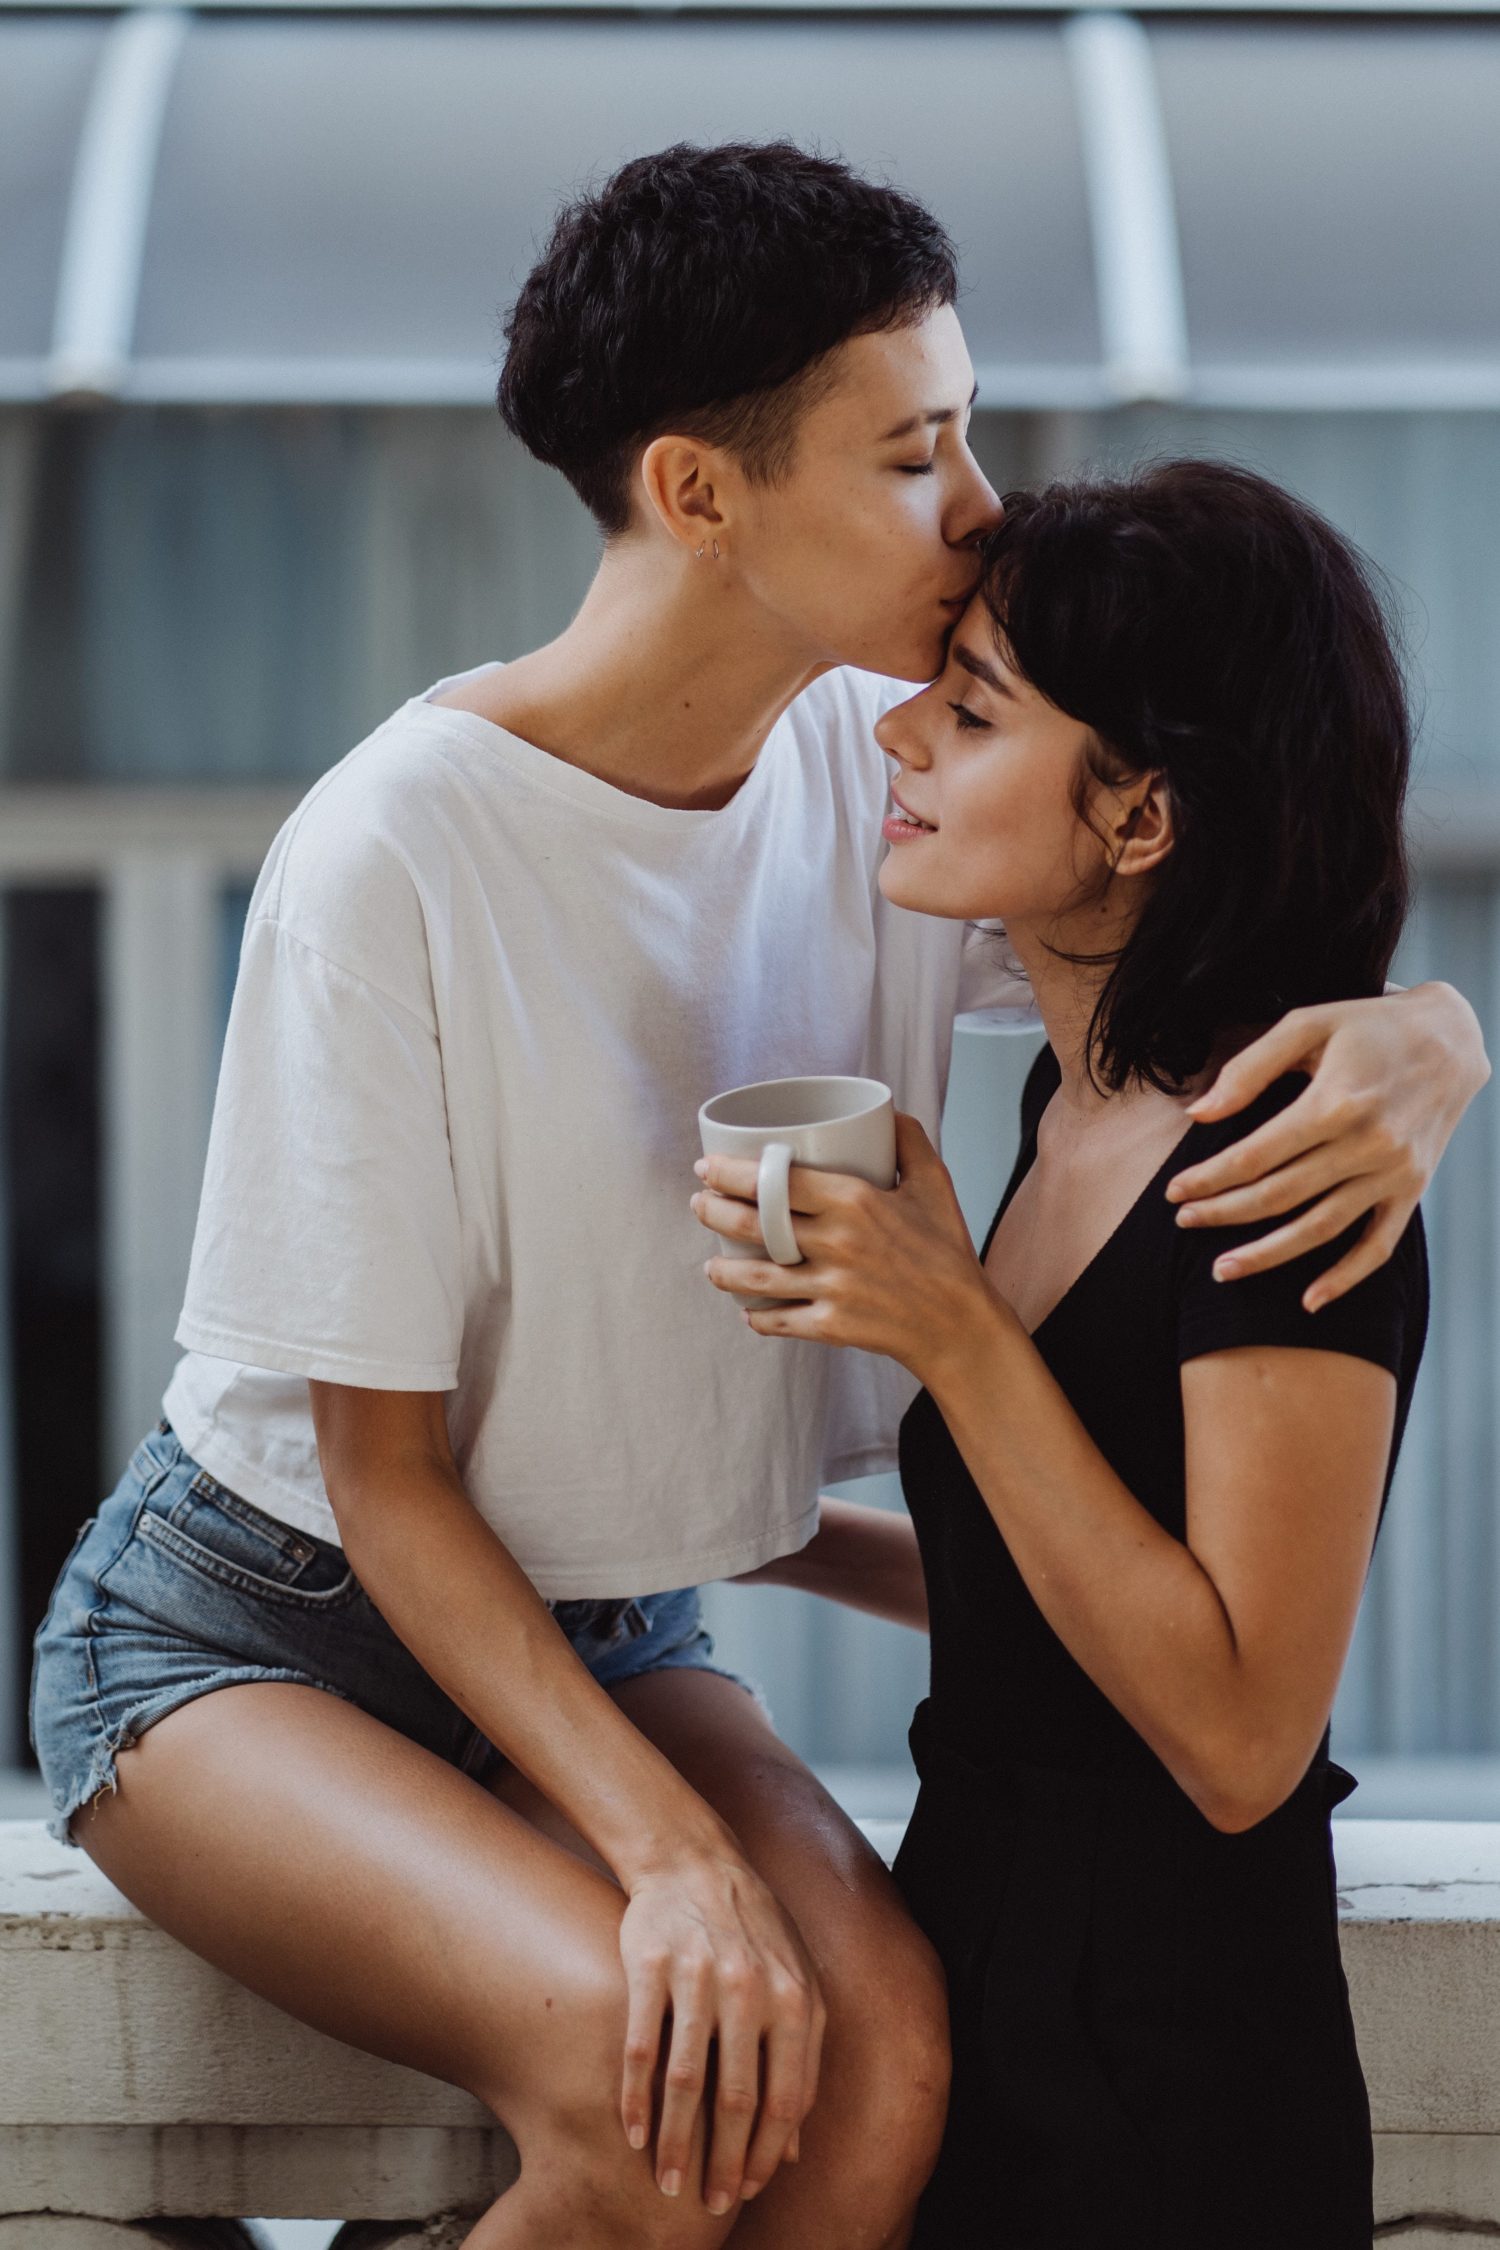 Photo of a queer couple. An androgynous person with short hair sits on a ledge, and is kissing the forehead of a femme presenting person in a black dress standing to their right. Both partners have brown skin and dark hair.